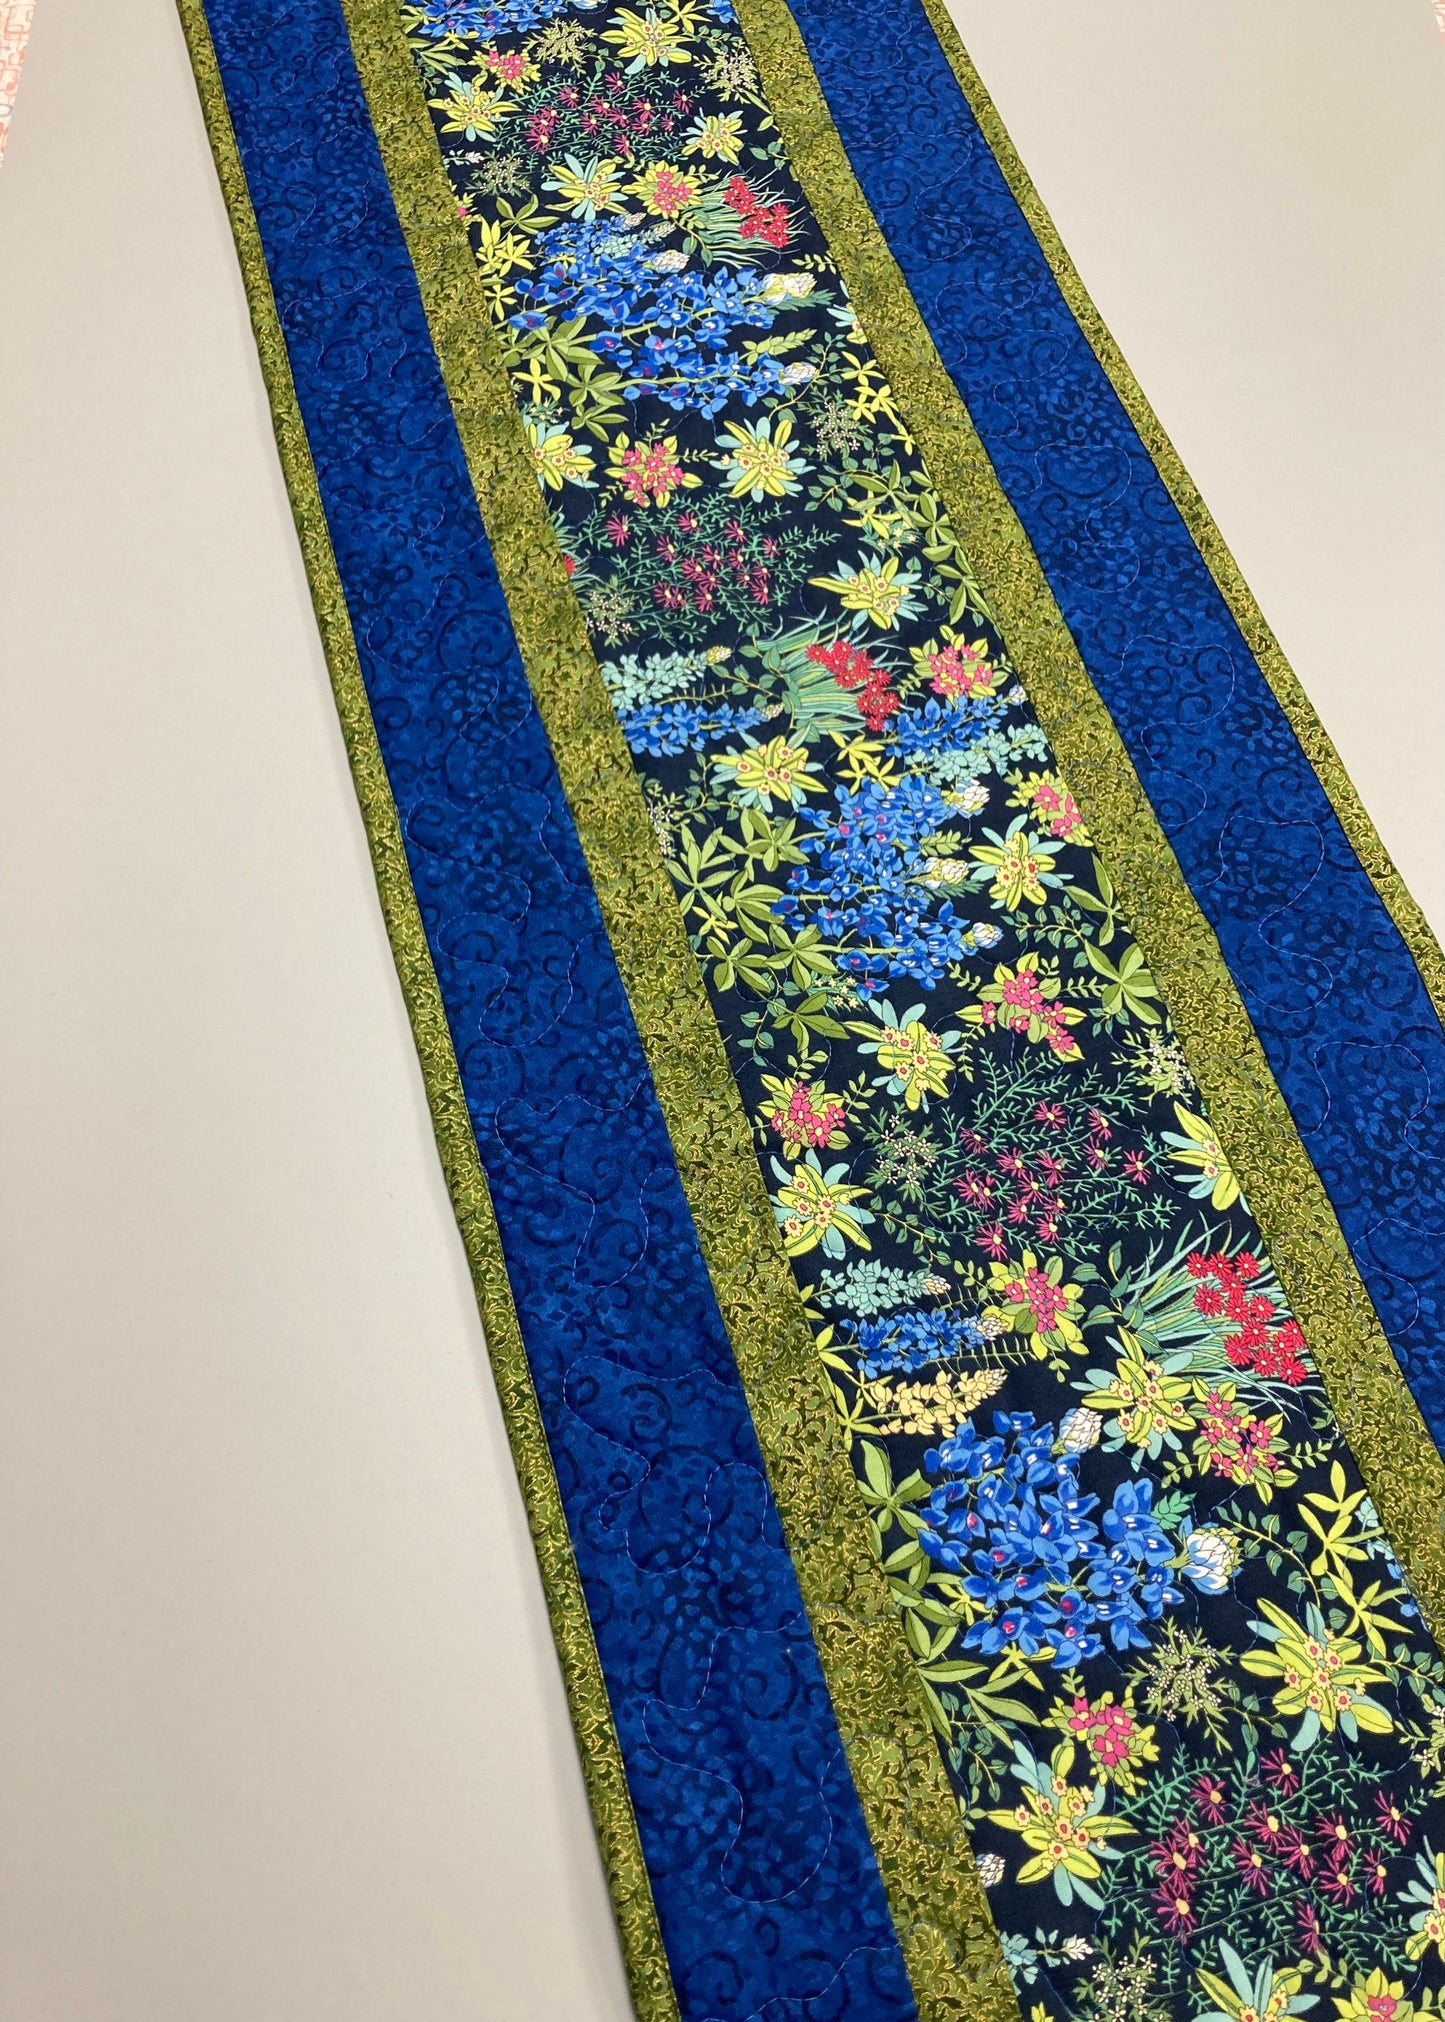 Garden Wildflower Quilted Table Runner for Dining Room, Reversible 13x48" Summer Spring Coffee End Table, Everyday Dresser Scarf Handmade